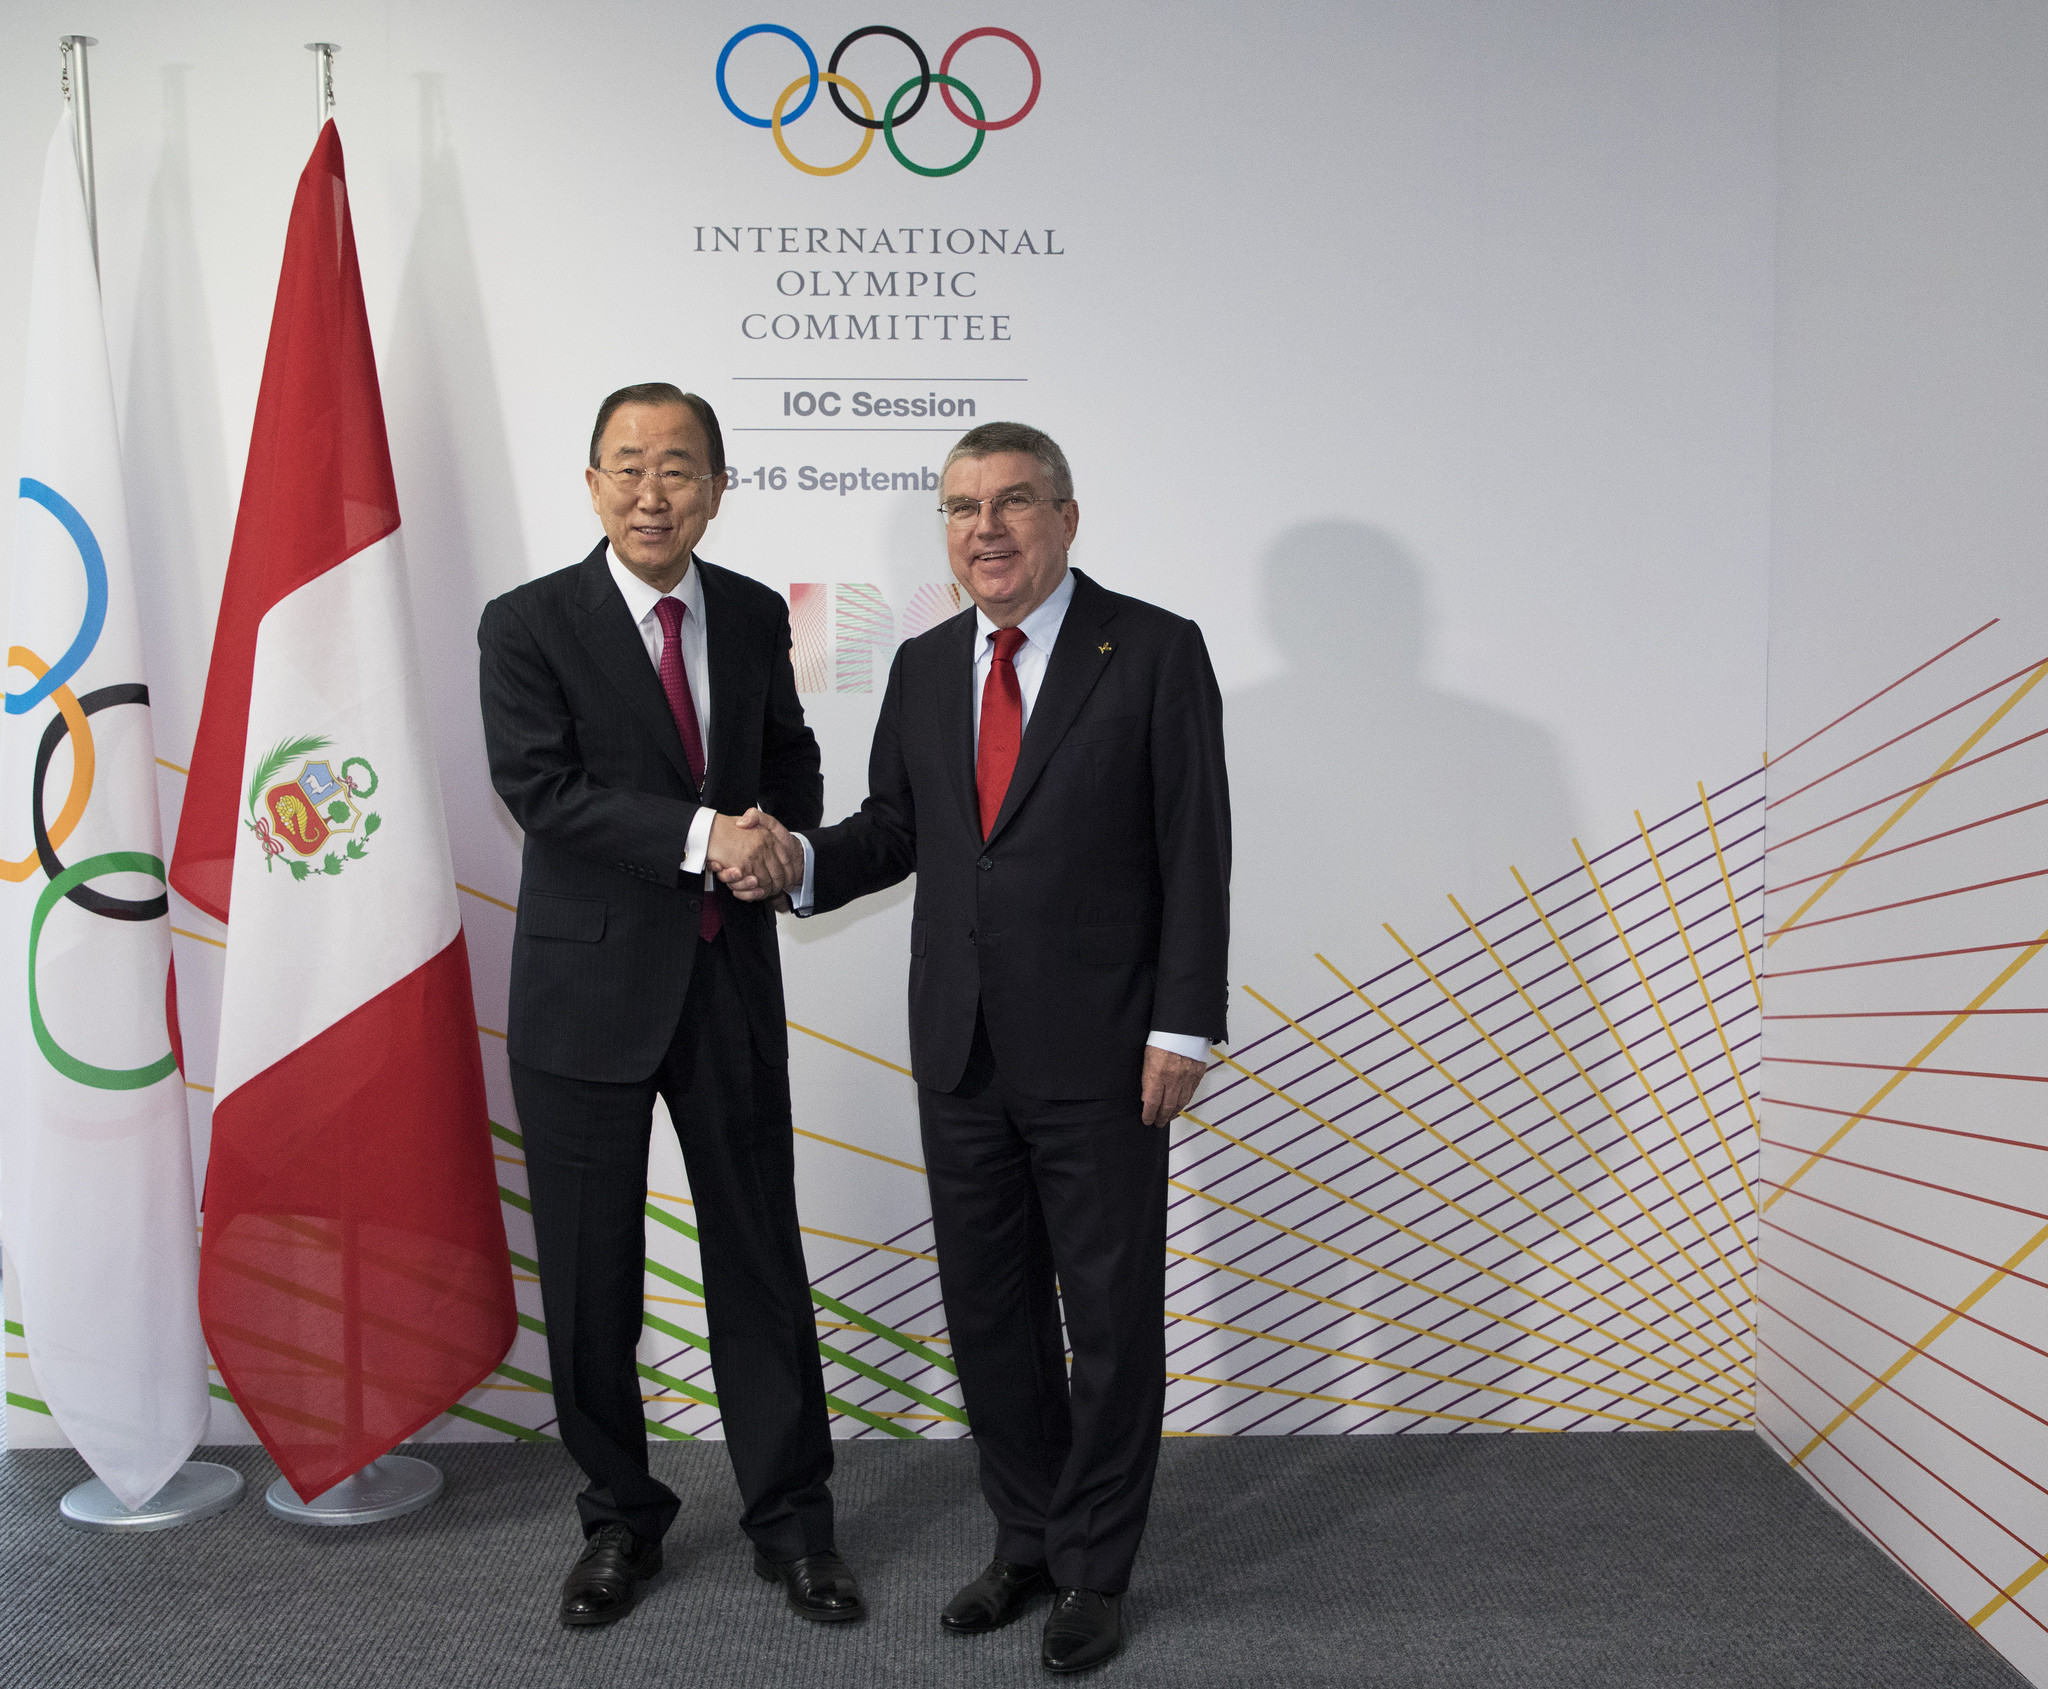 Ban Ki-moon promises to improve accountability of IOC as members speak out on corruption allegations